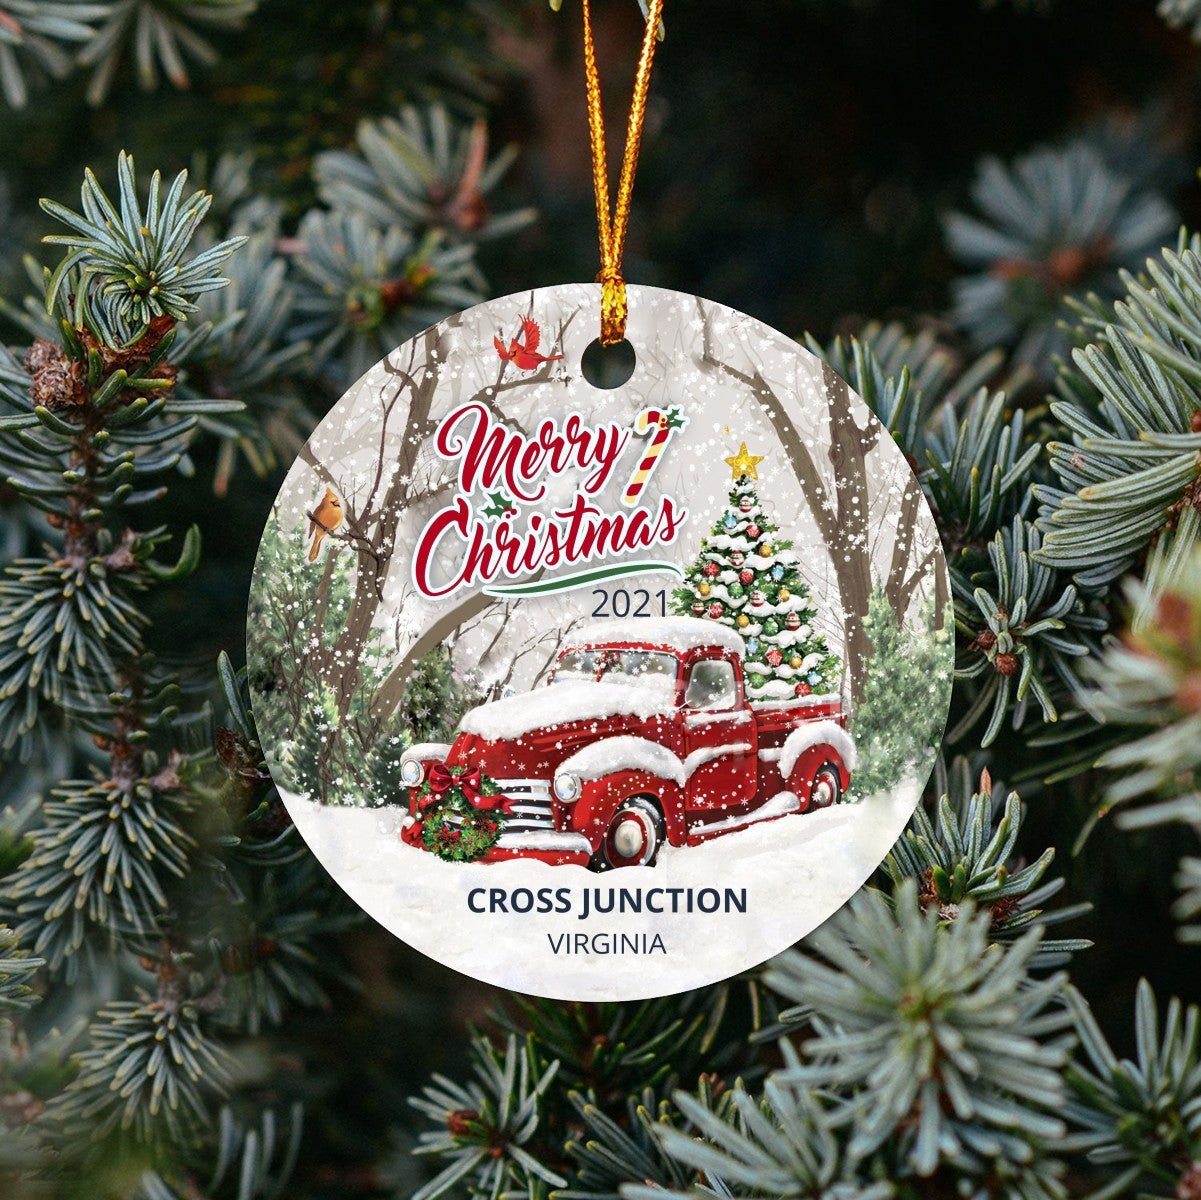 Christmas Tree Ornaments Cross Junction - Ornament With Name City, State Cross Junction Virginia VA Ornament - Red Truck Xmas Ornaments 3'' Plastic Gift For Family, Friend And Housewarming